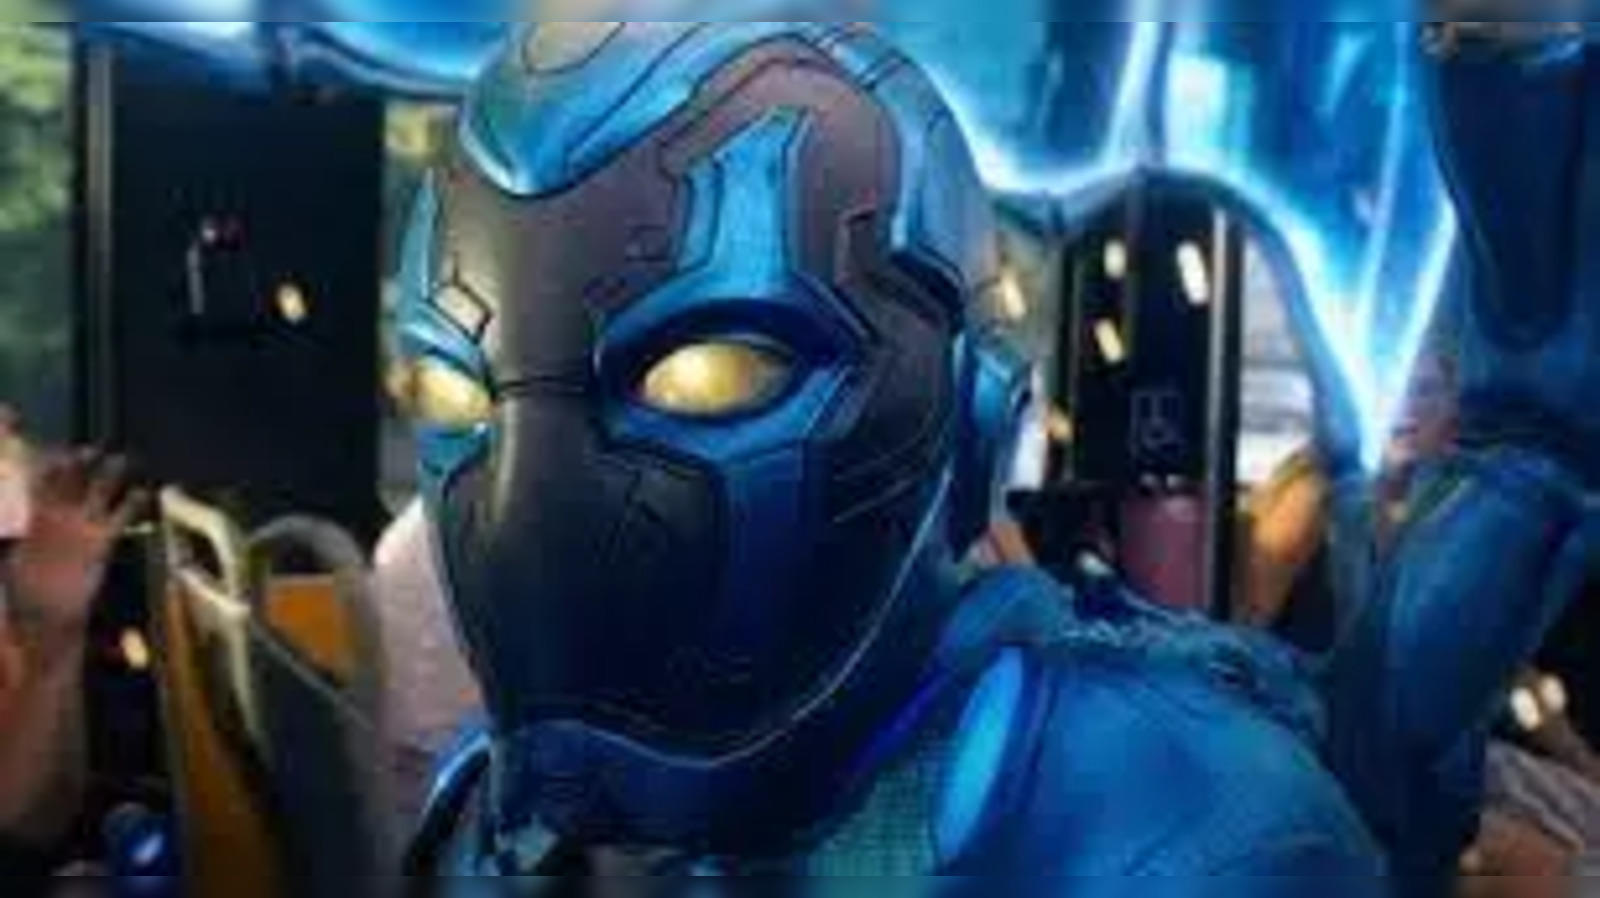 Blue Beetle: 'Blue Beetle': See when and where to watch online and